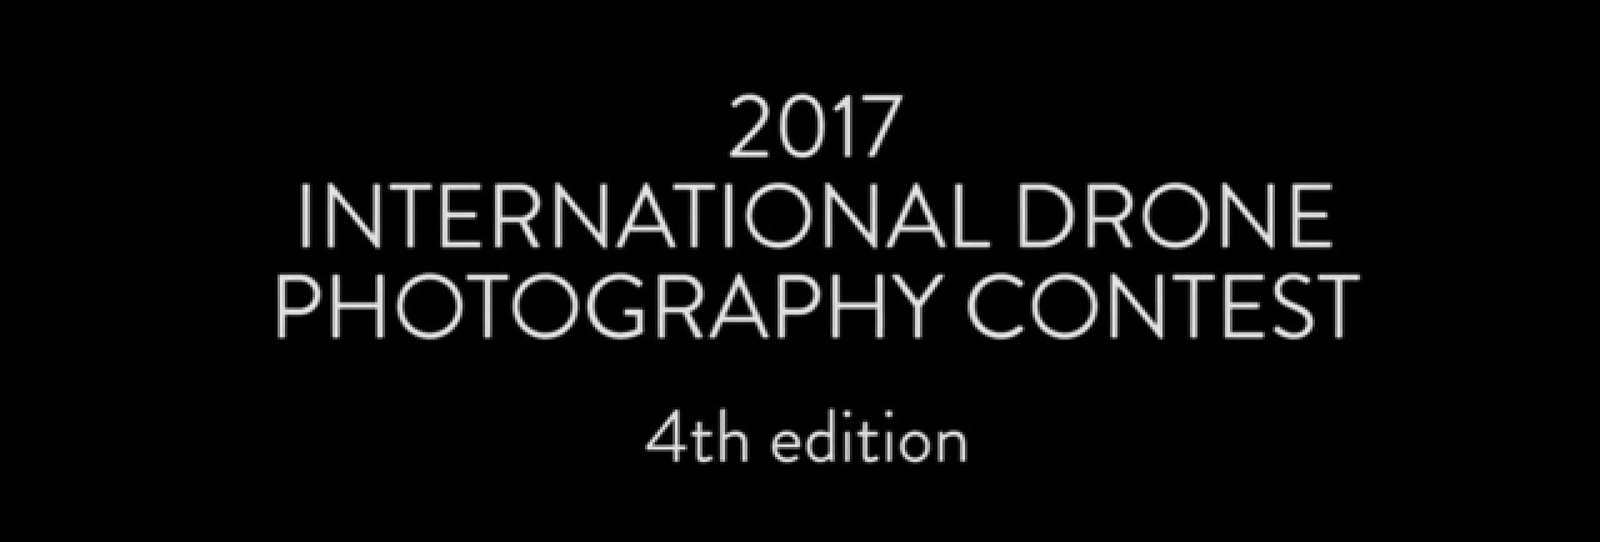 2017 International Drone Photography Contest